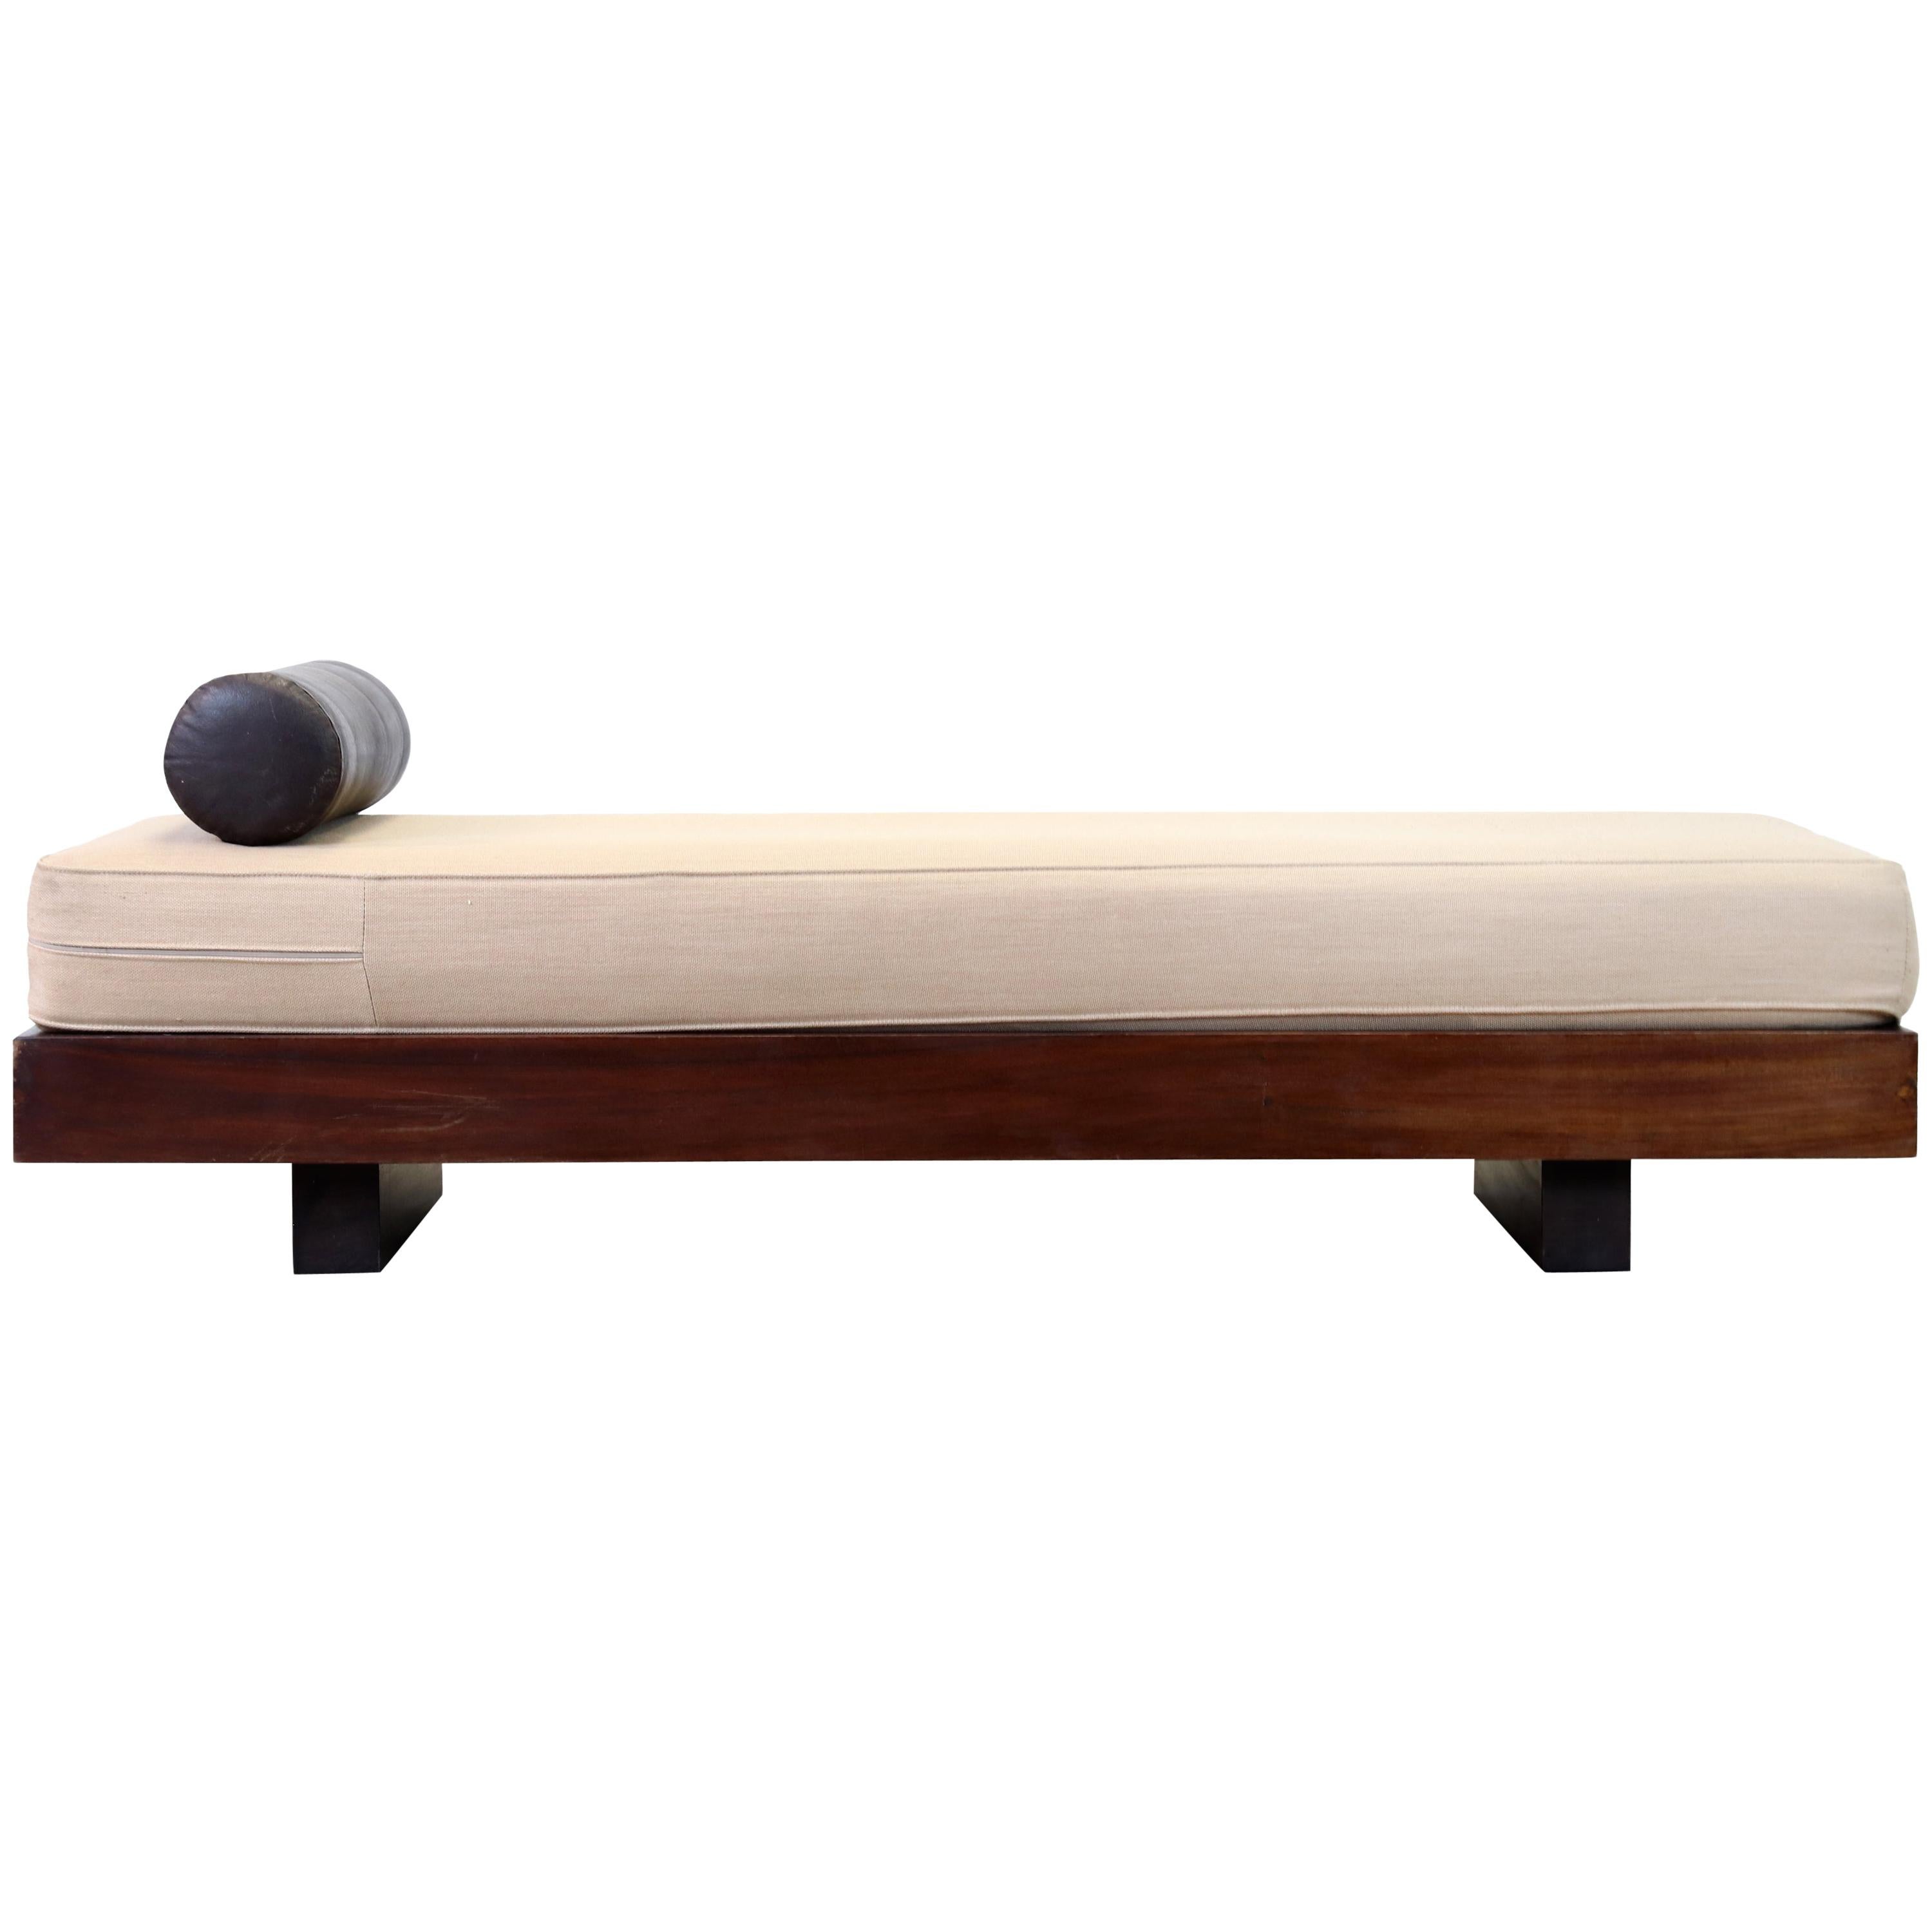 Modernist Mahogany Daybed in the Style of Charlotte Perriand, France, 1950s